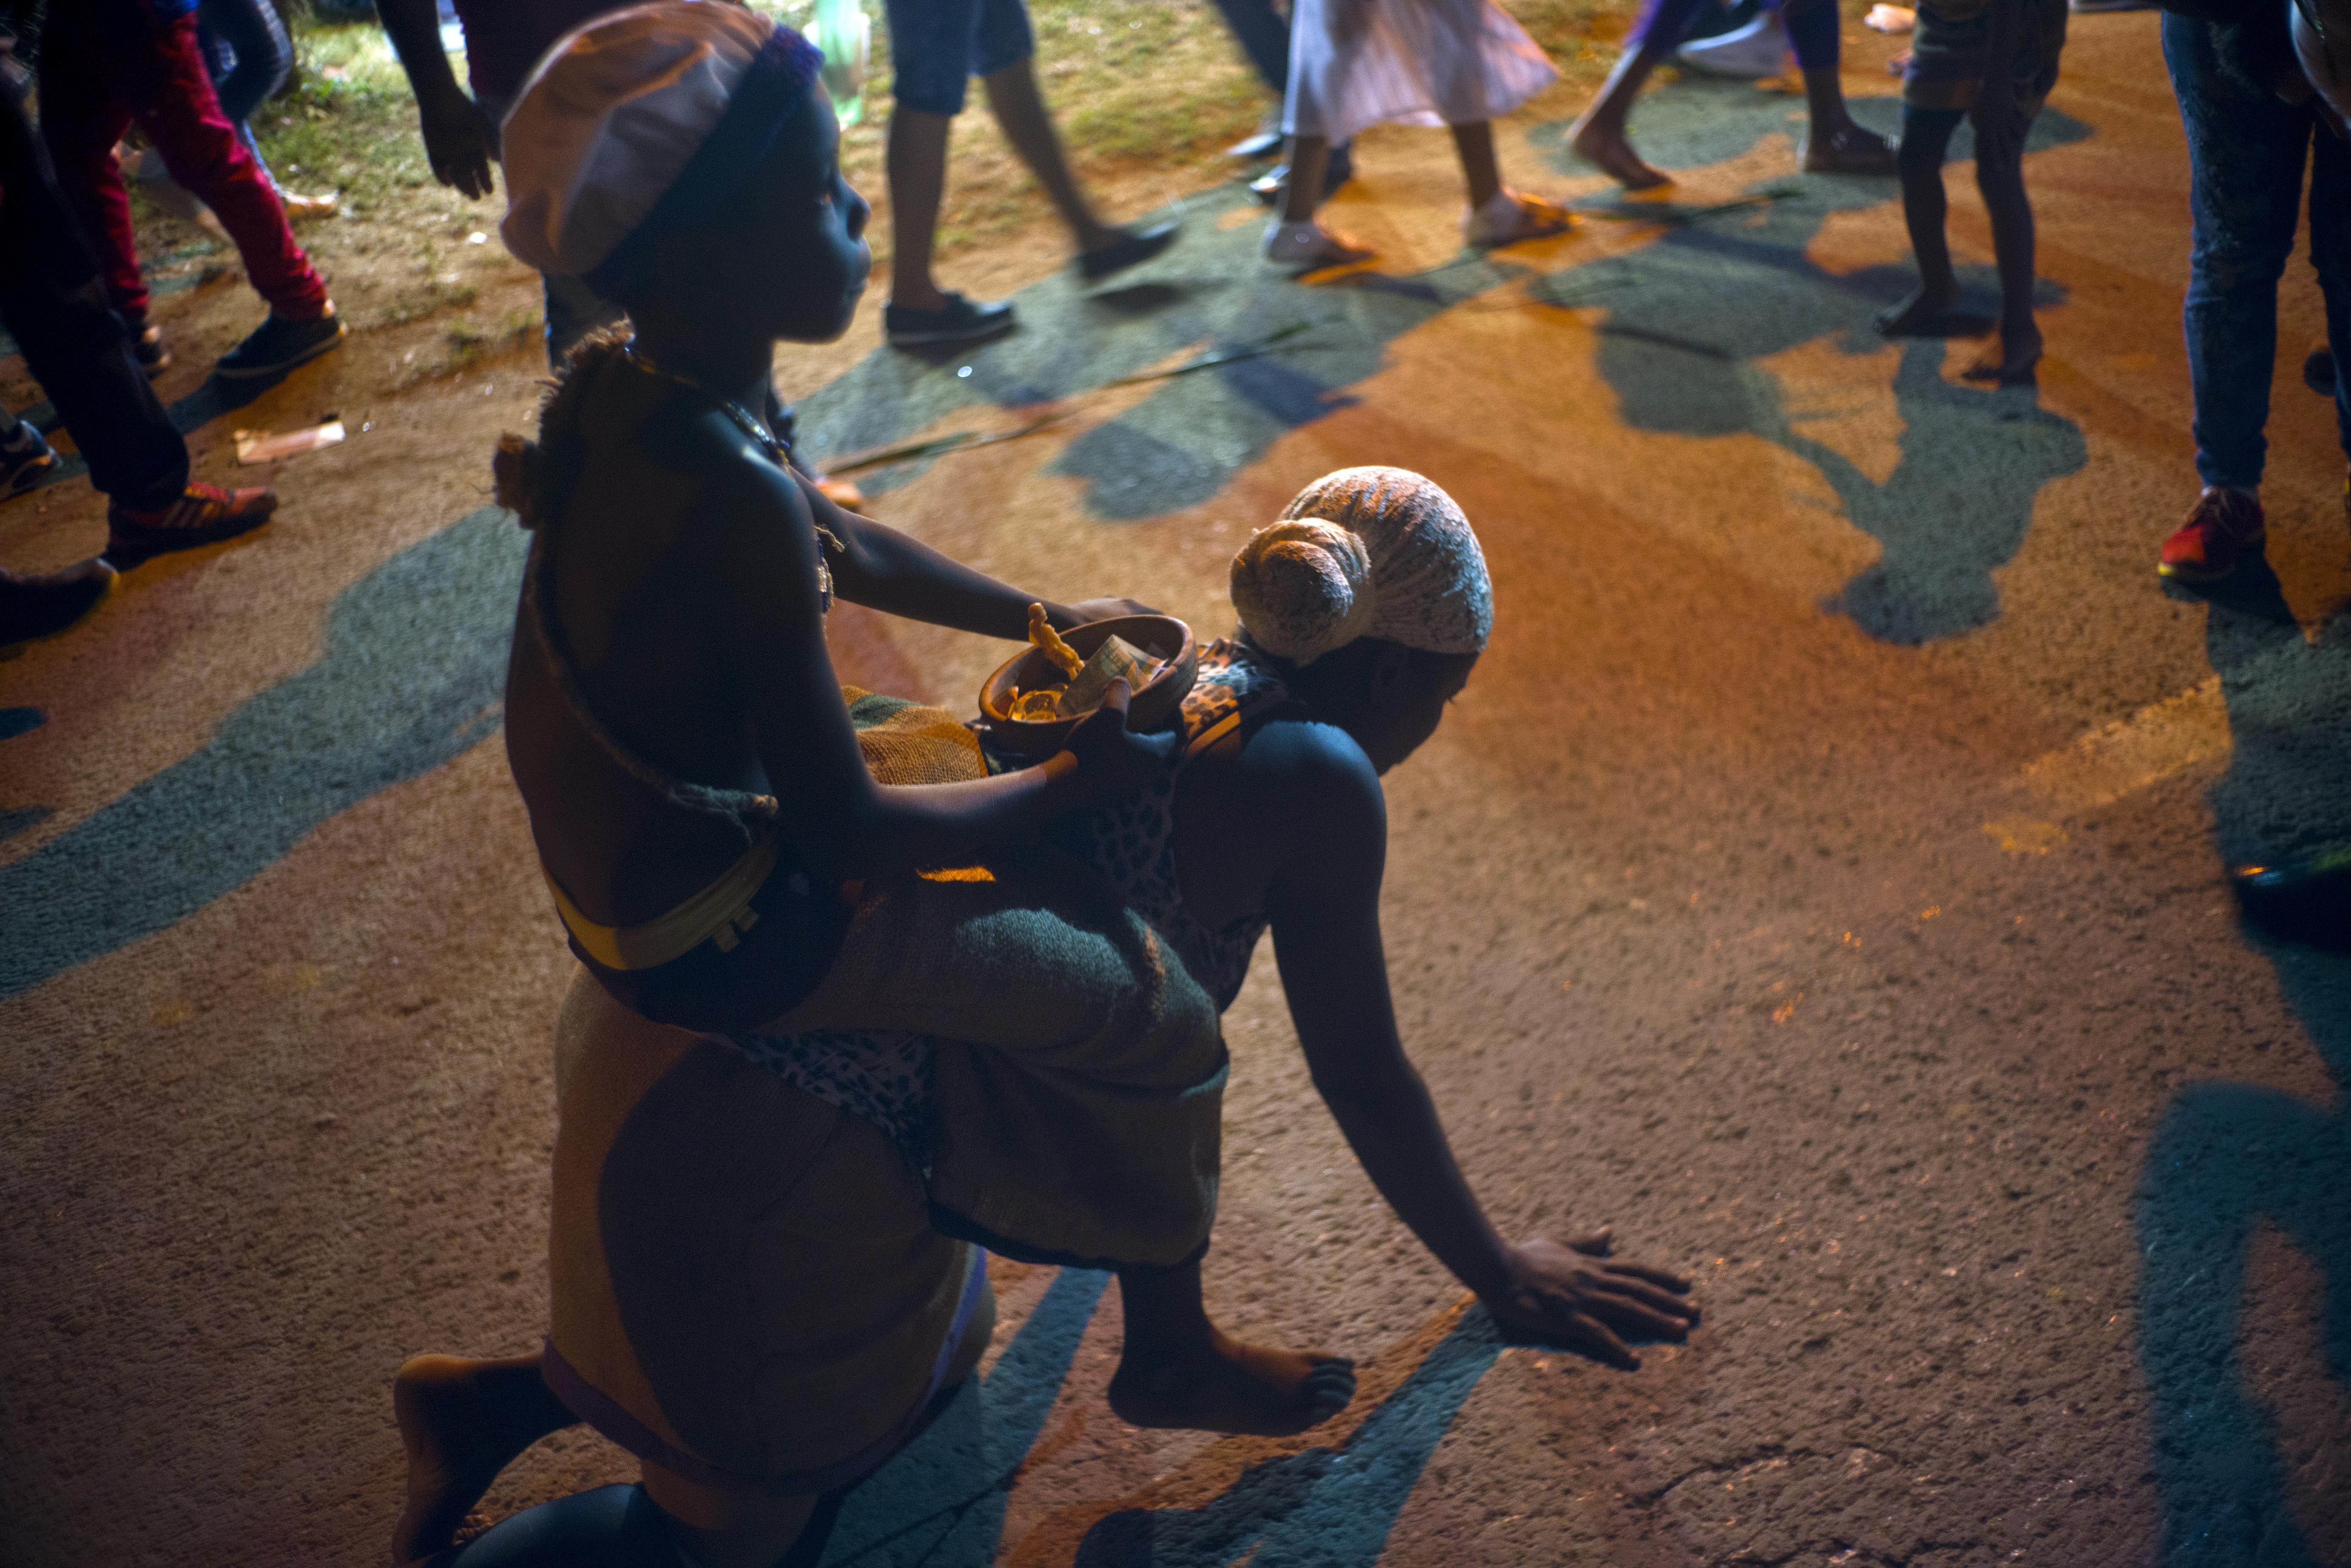 A child rides on the back of a believer in Saint Lazarus walking on her knees as a self-imposed penance during her pilgrimage to the saint's shrine in El Rincon, an area of Santiago de las Vegas, Cuba, late Friday, Dec. 16, 2016. The Catholic saint is also known as the Afro-Cuban Yoruba deity Babalu Aye, protector of the sick, an example of Cuba's religions syncretism. His feast day is every Dec. 17. (AP Photo/Ramon Espinosa)